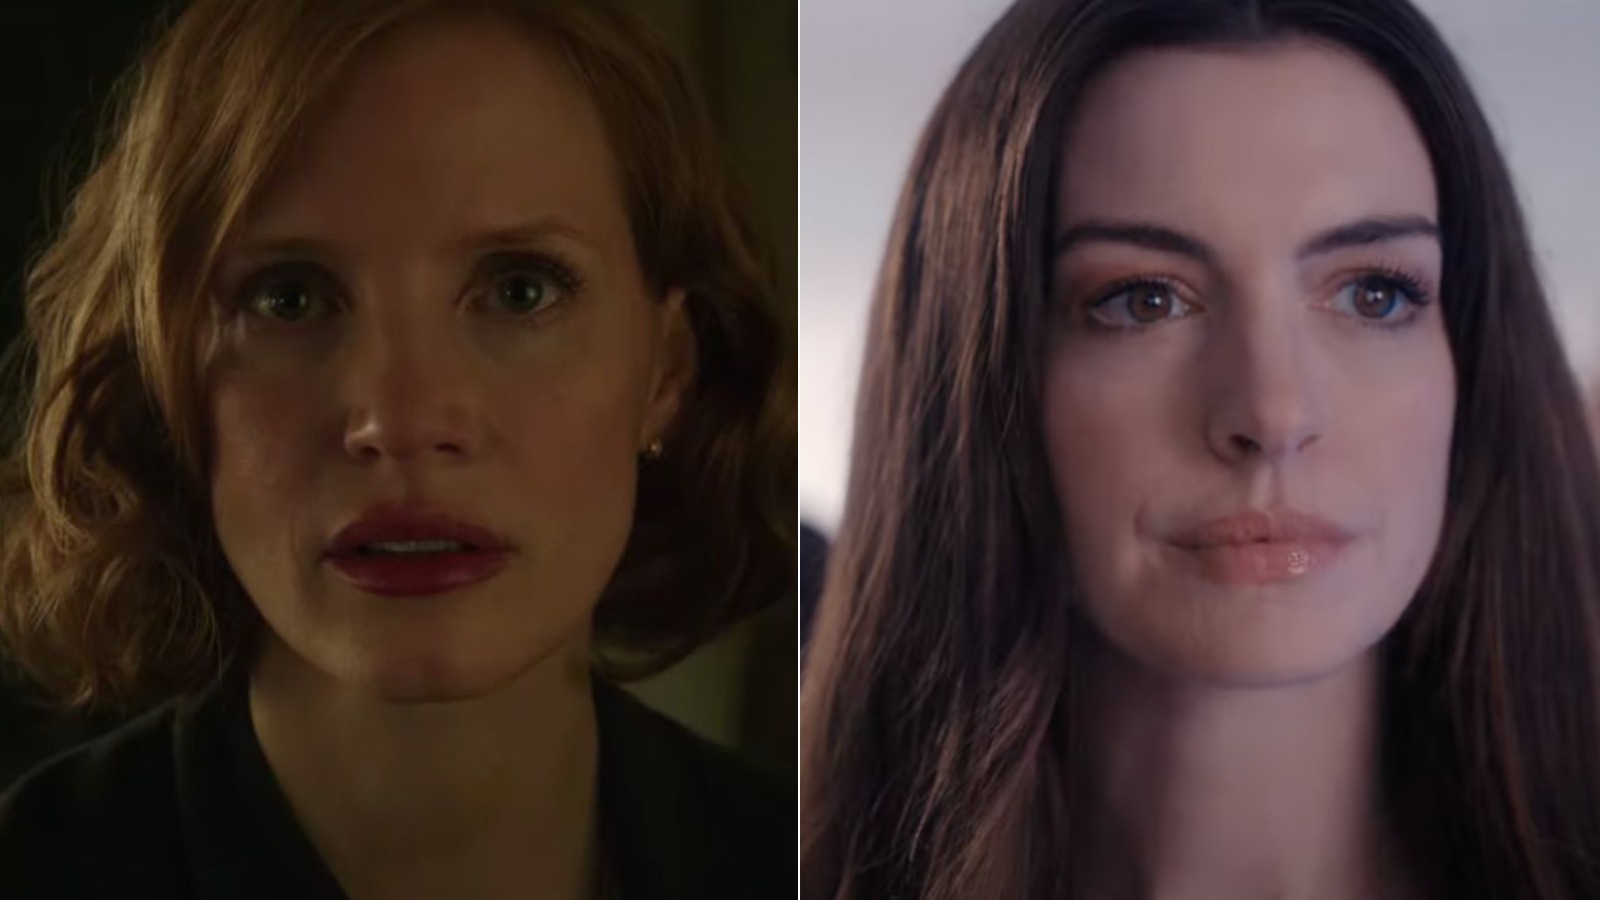 Anne Hathaway Porn Gallery - Jessica Chastain And Anne Hathaway To Co-Star In Psychological Thriller  Mothers' Instinct